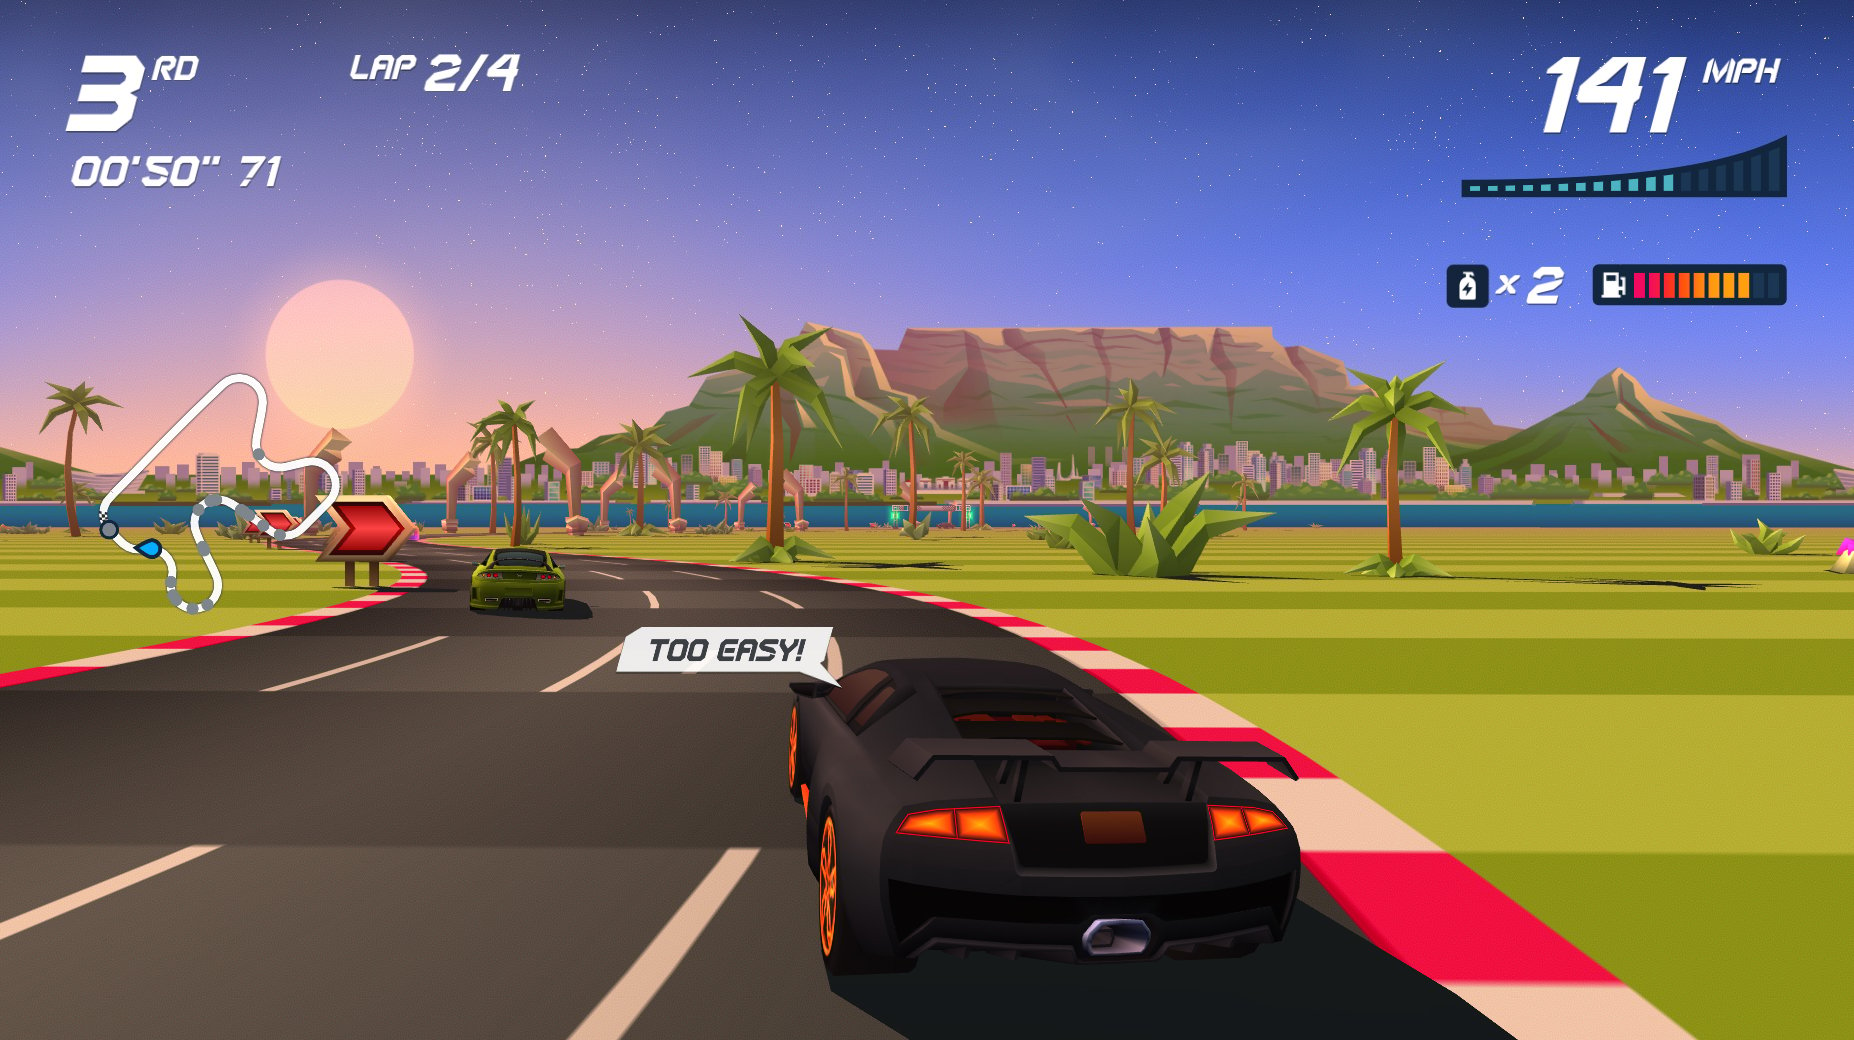 The Epic Games Store's latest free title is Horizon Chase Turbo | VGC